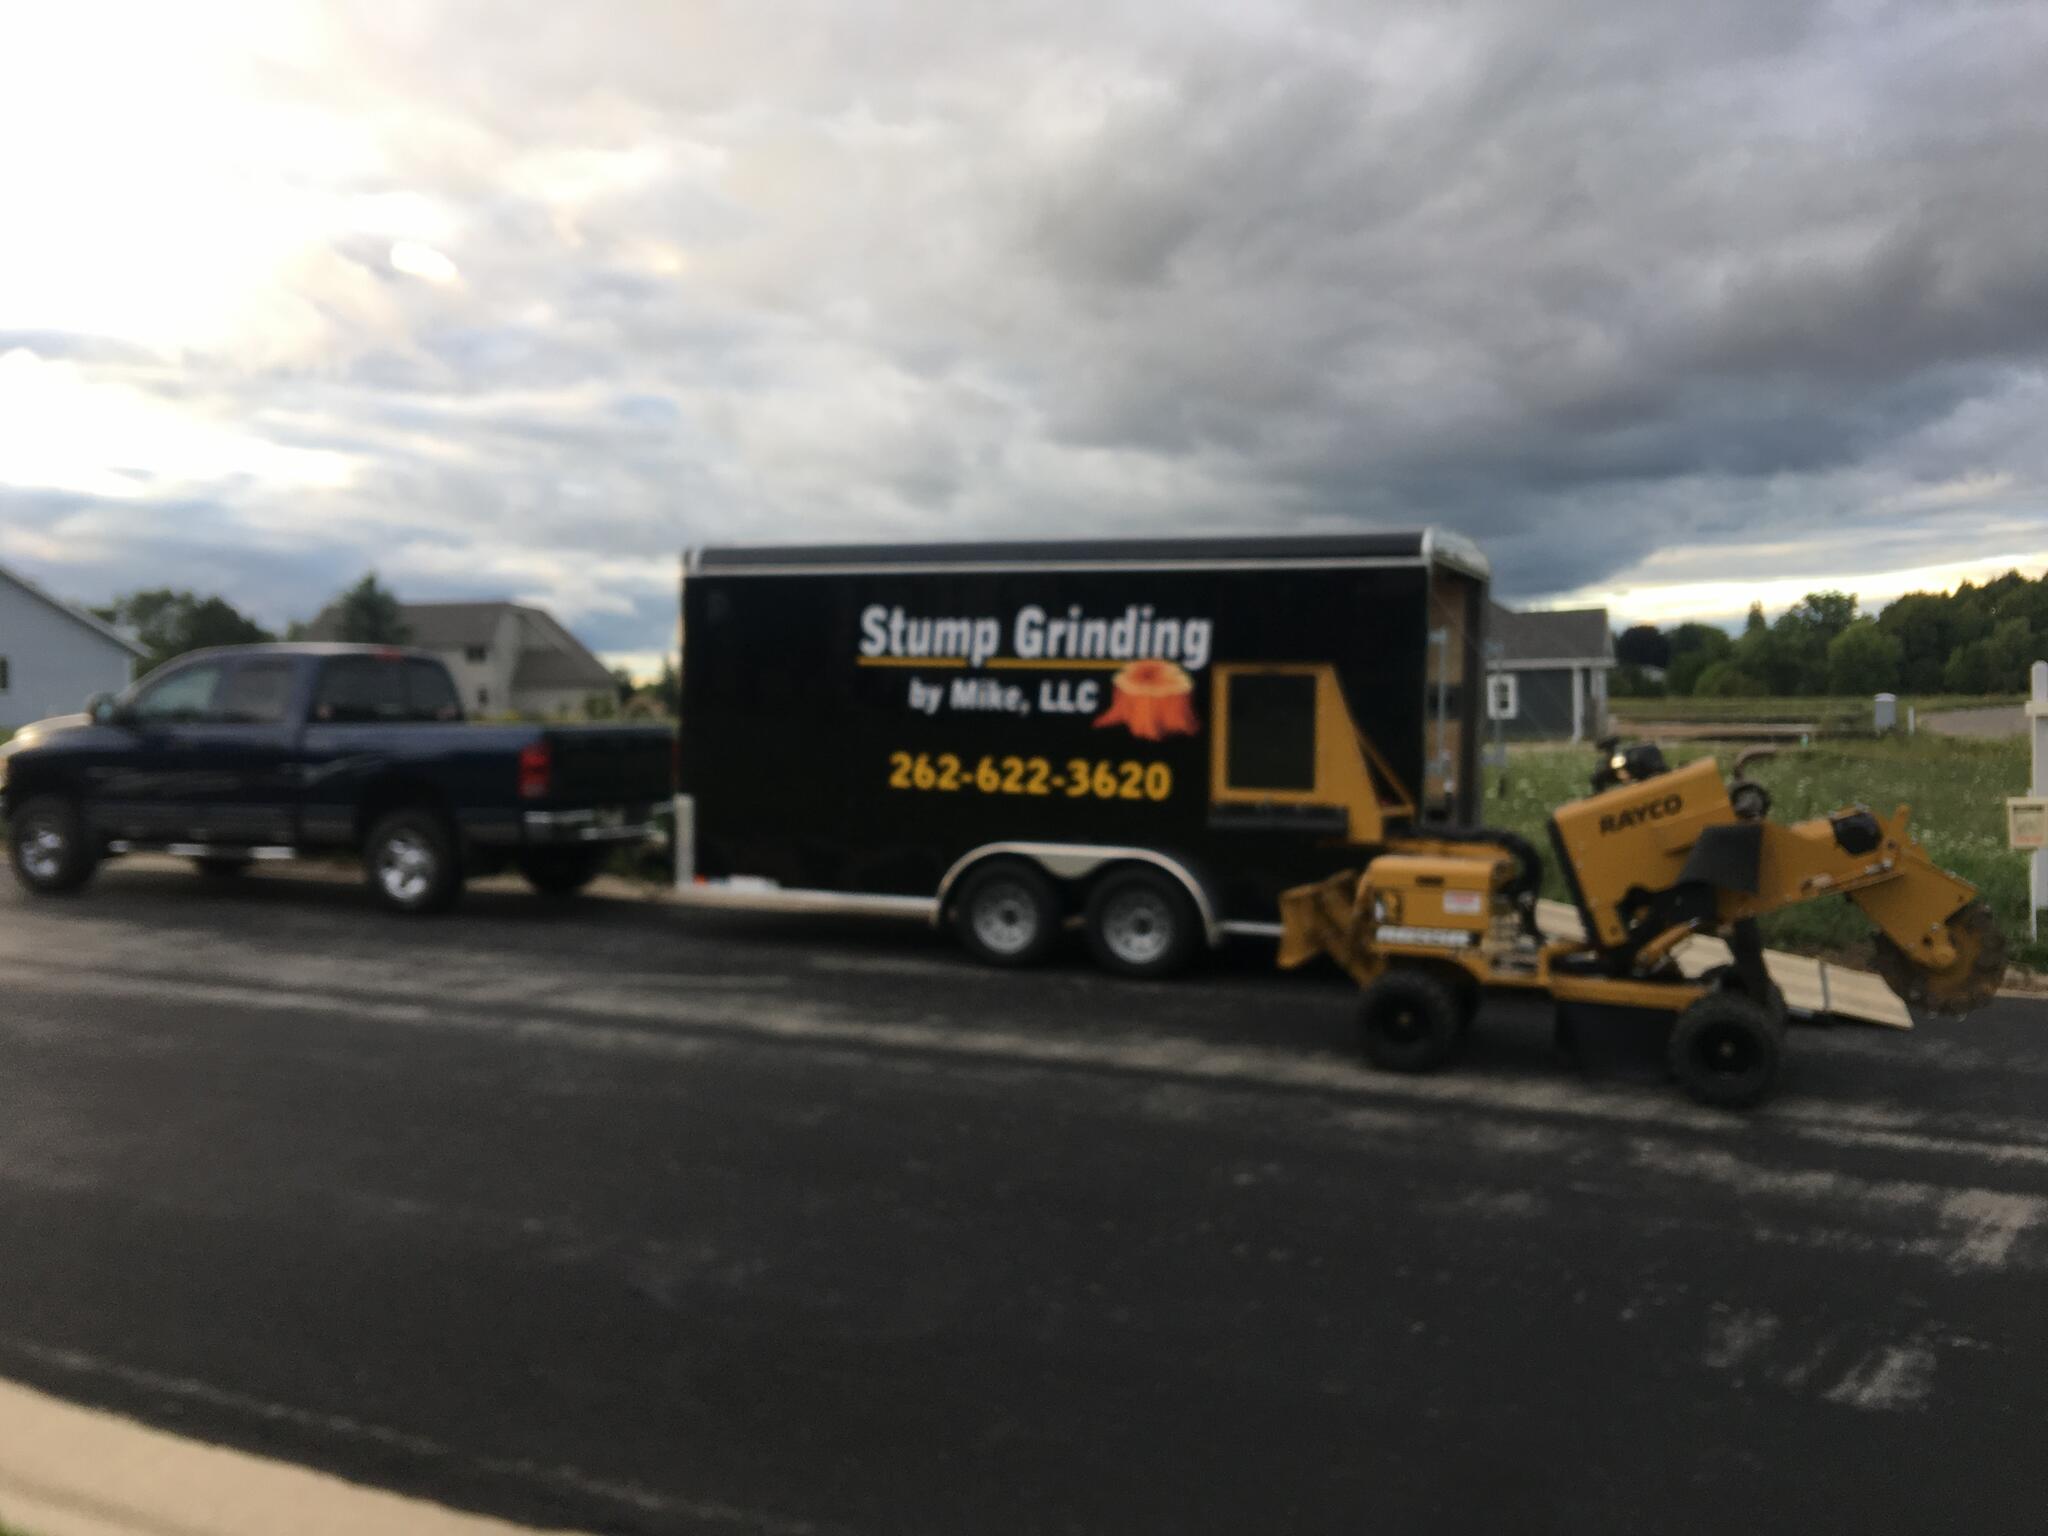 Stump Grinding by Mike, LLC 2912 Co Rd C, Jackson Wisconsin 53037